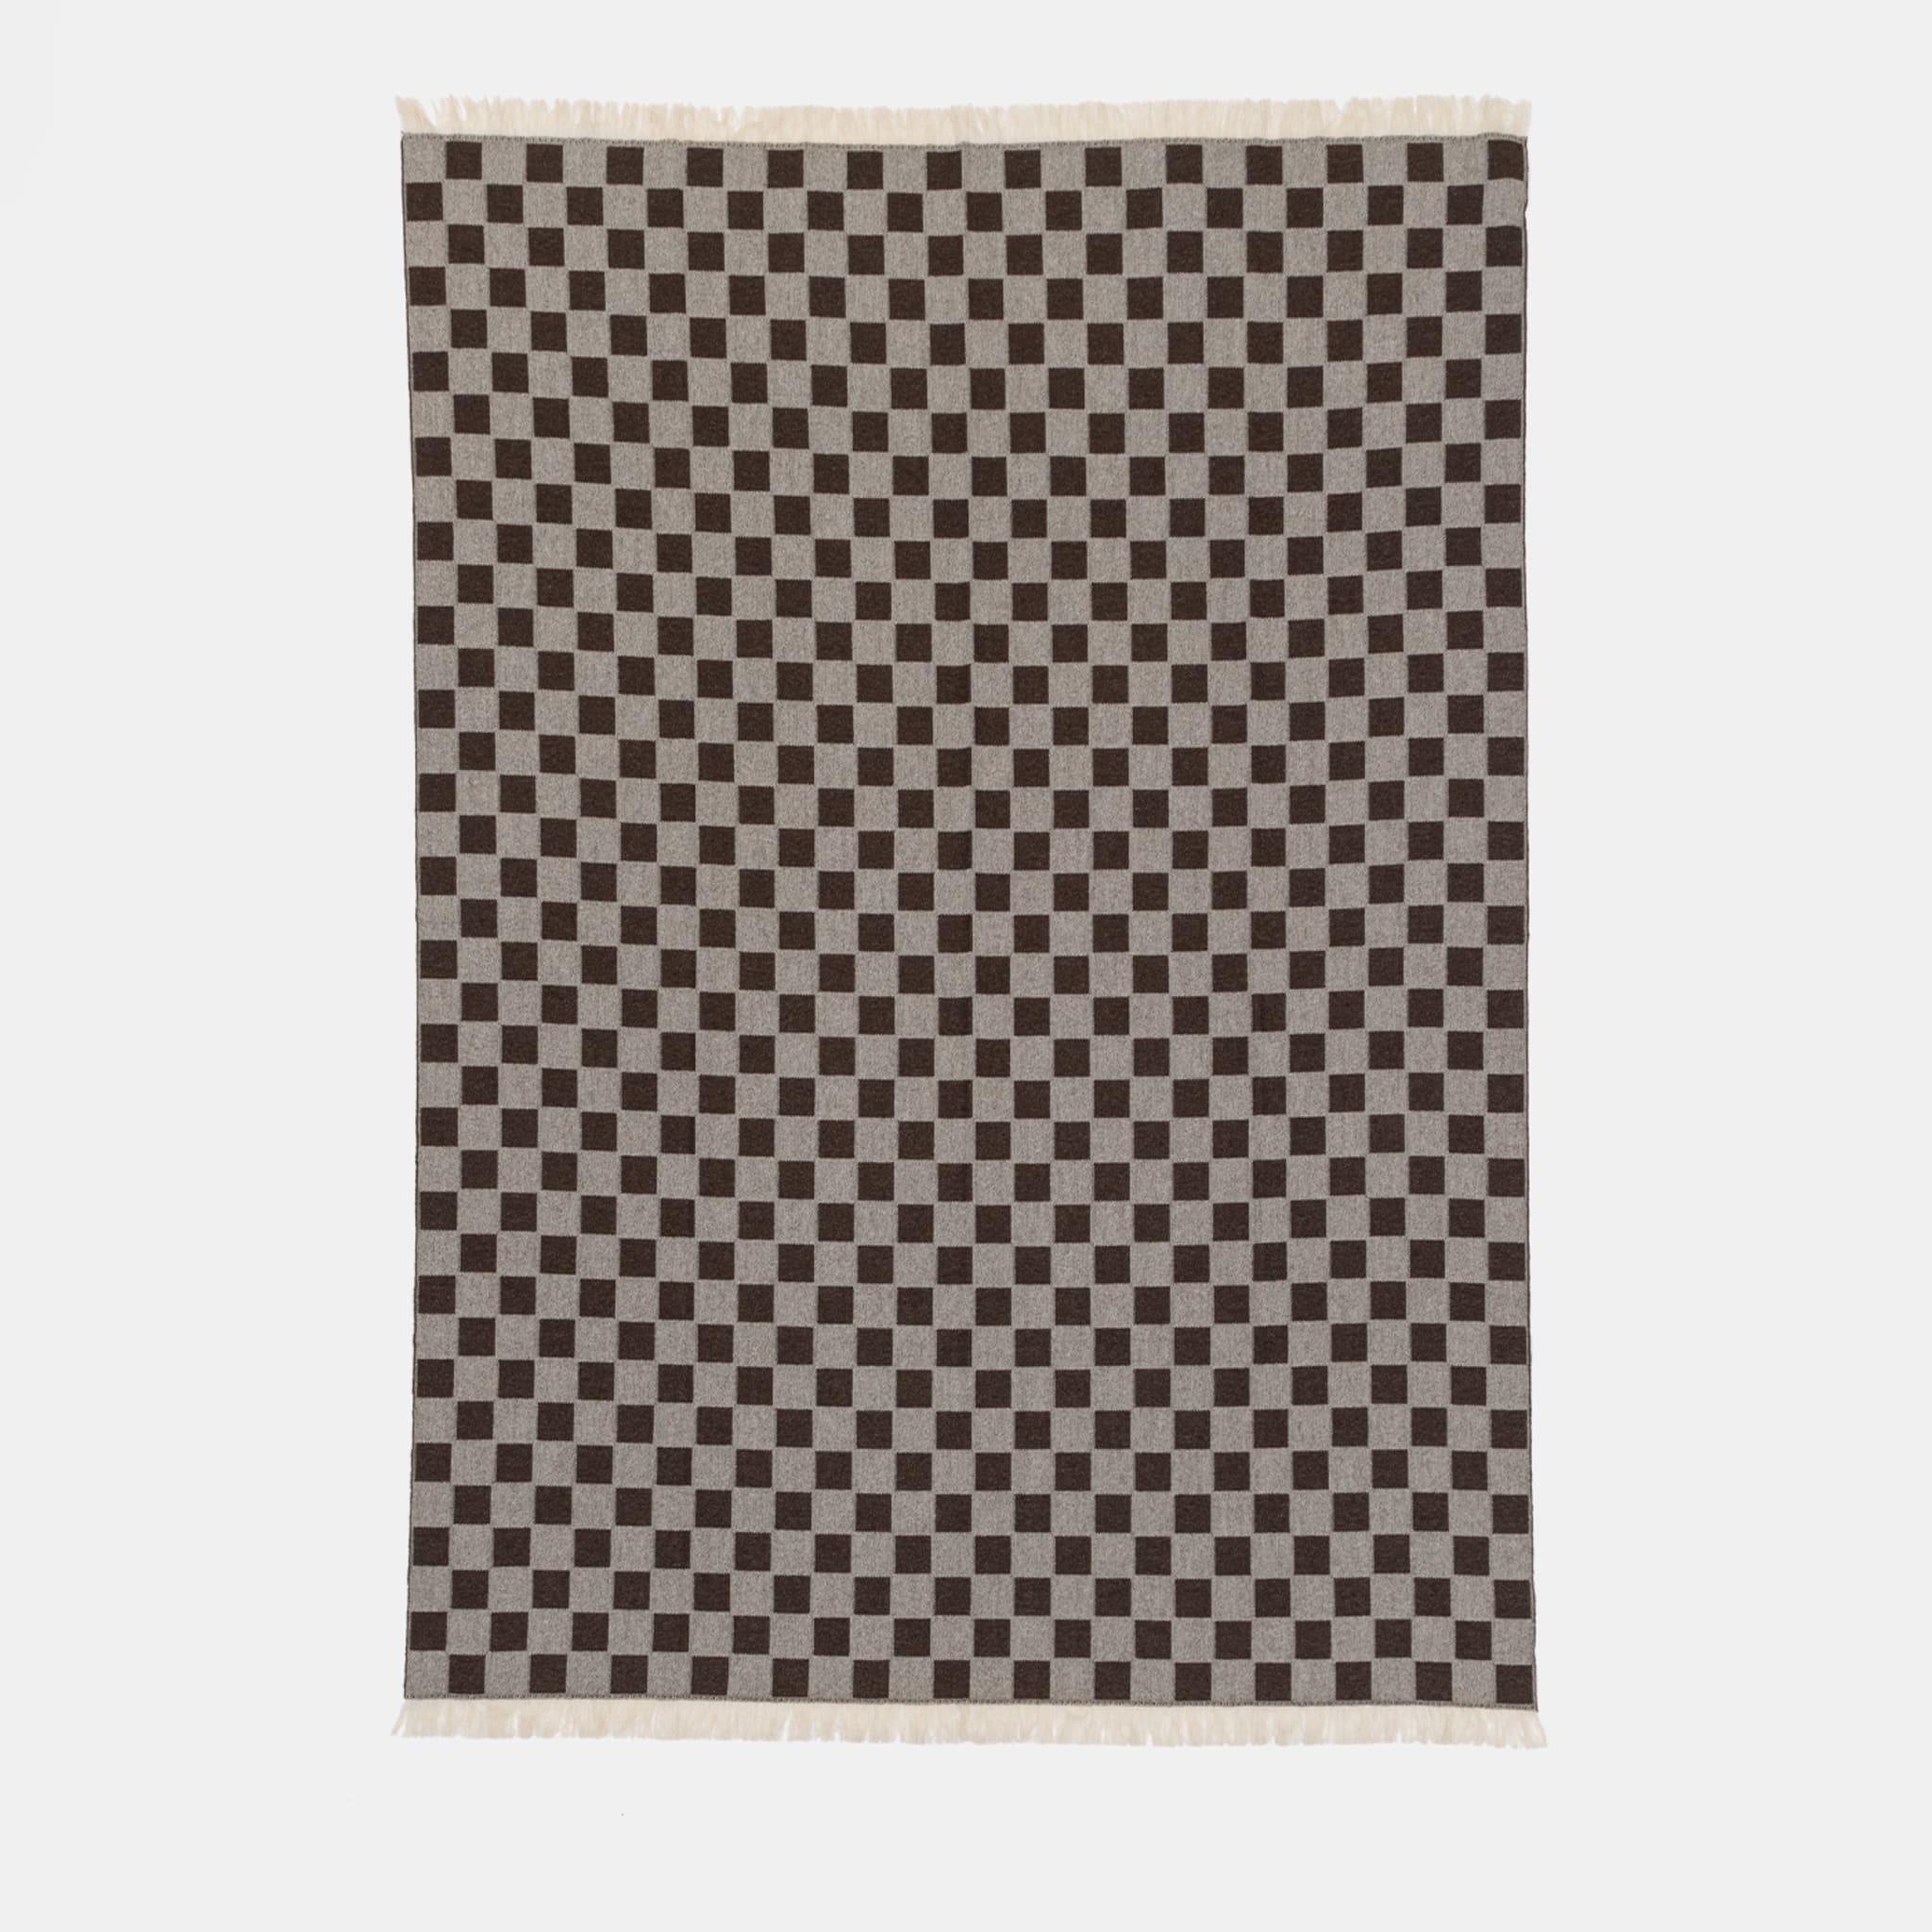 Fringed Brown Chessboard-Patterned Blanket - Alternative view 1